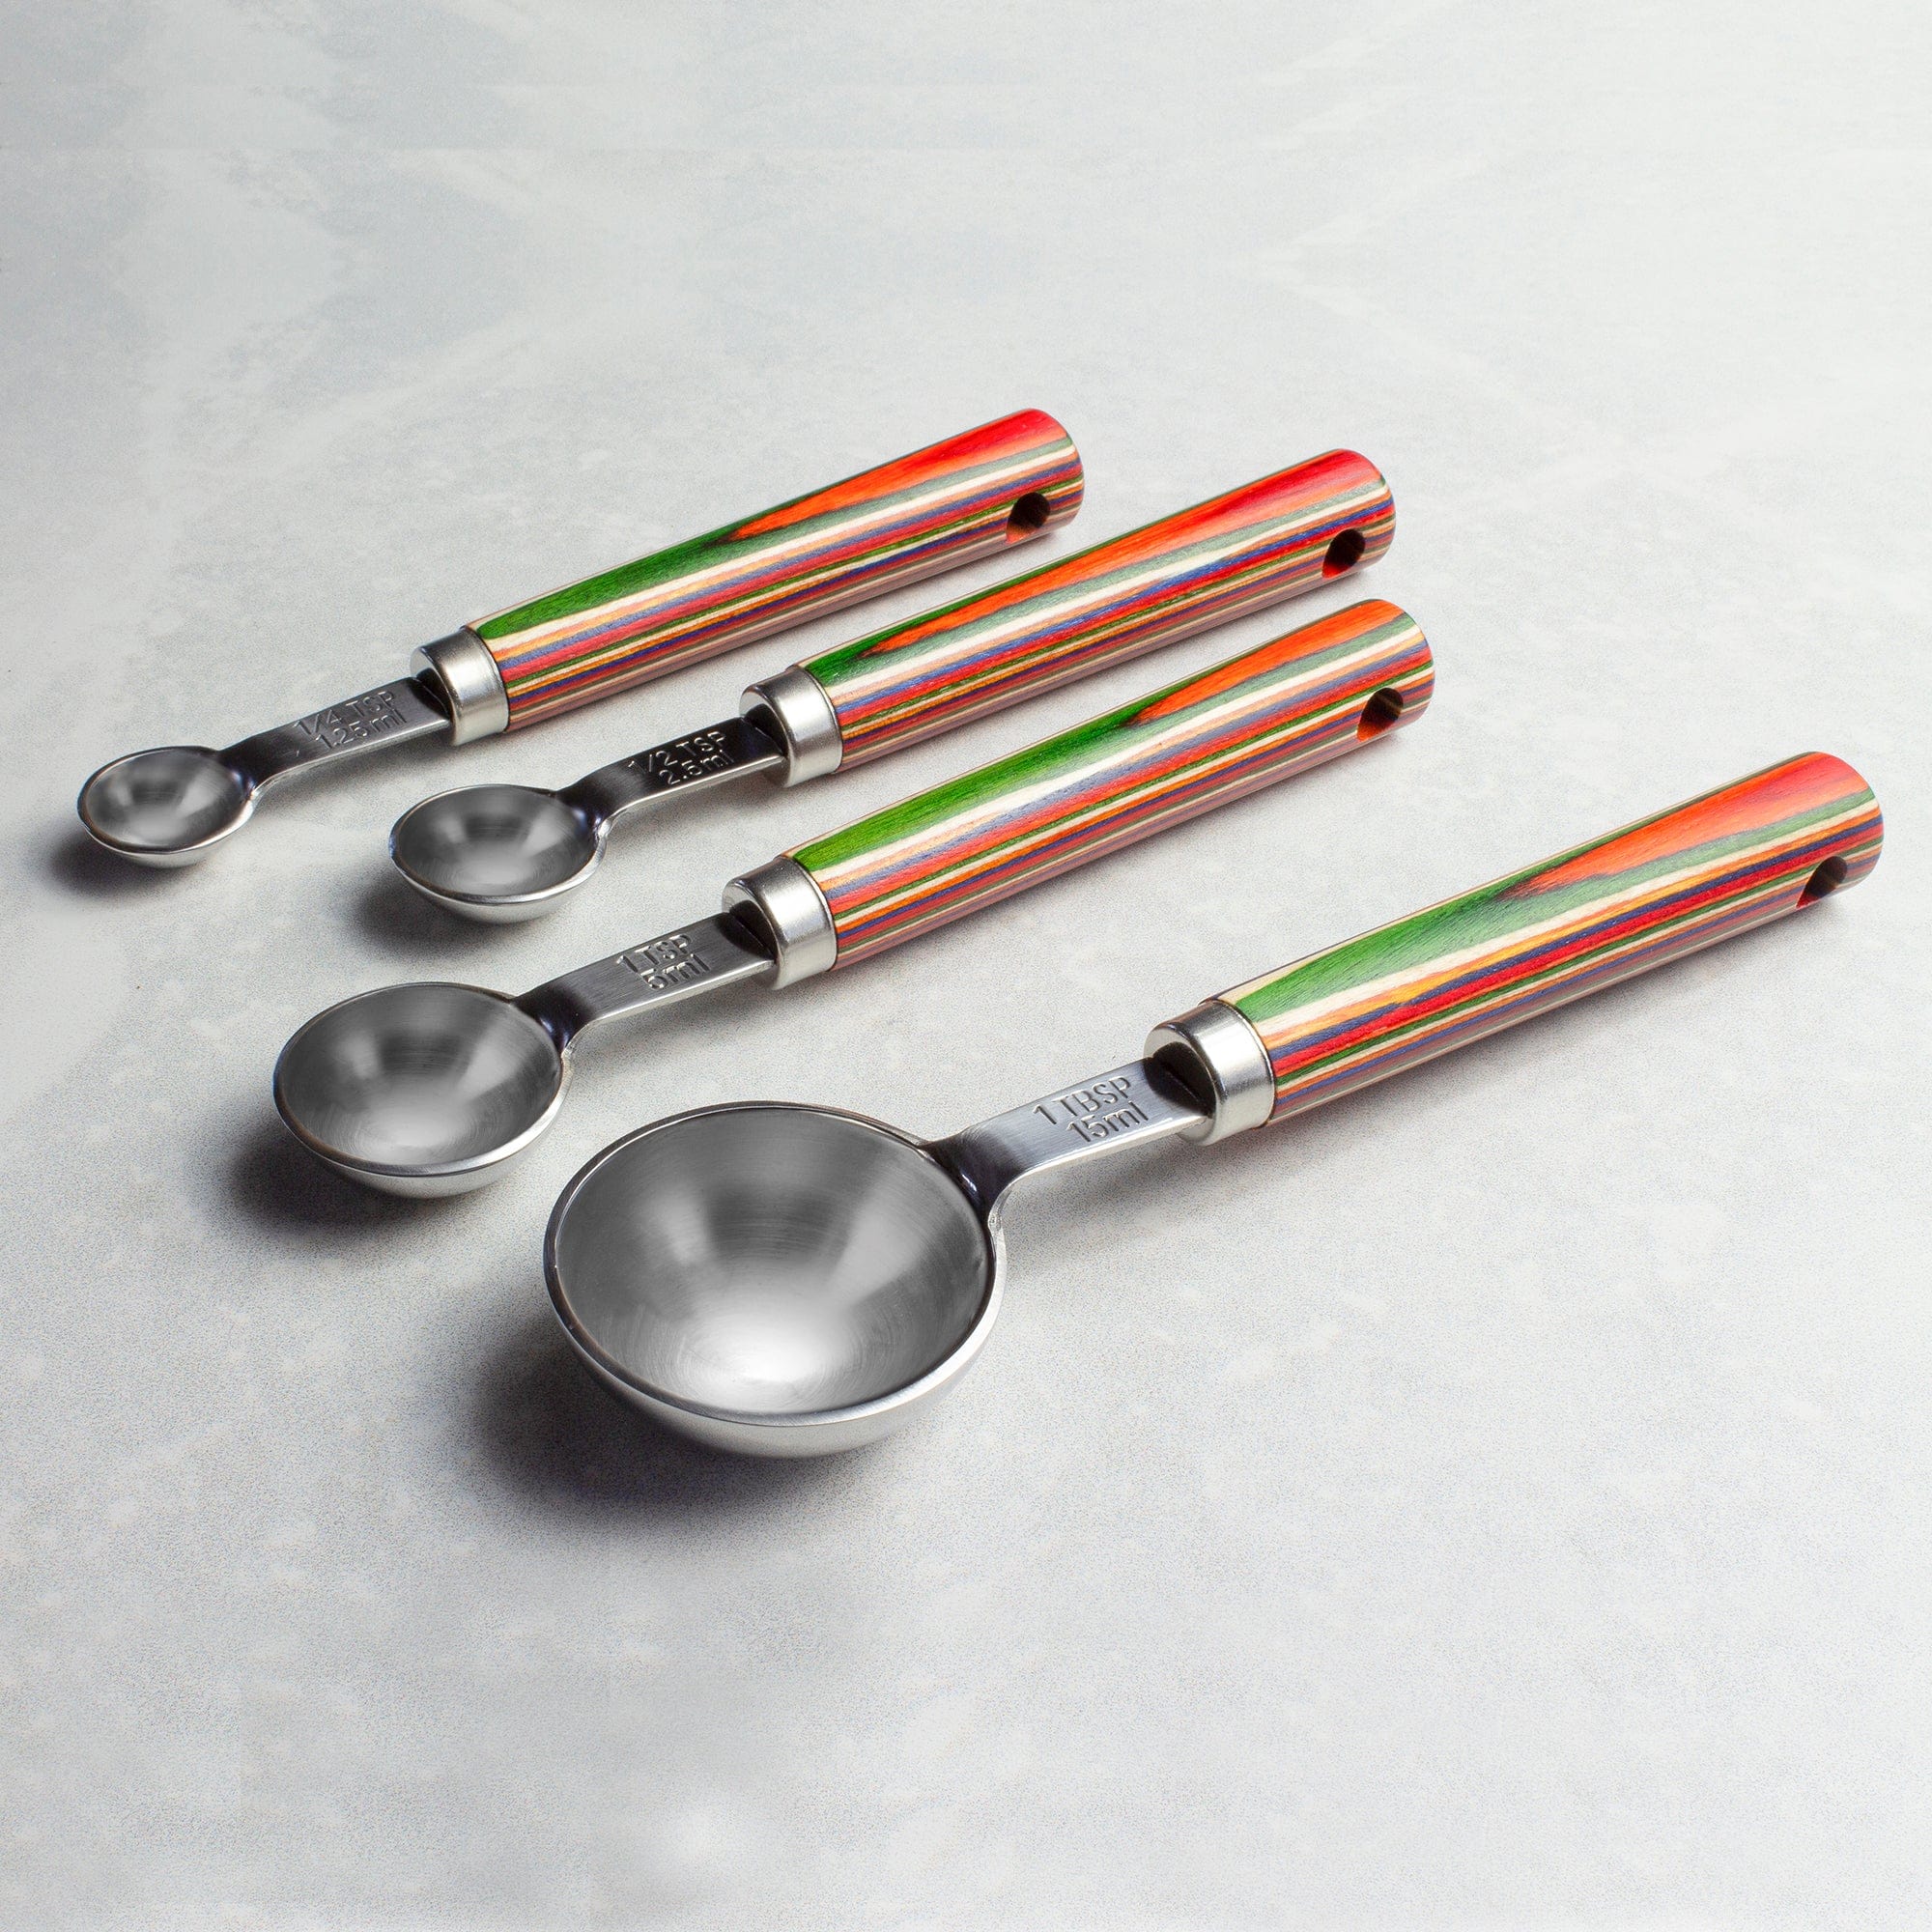 Measuring Cups with Complete Spoons Set